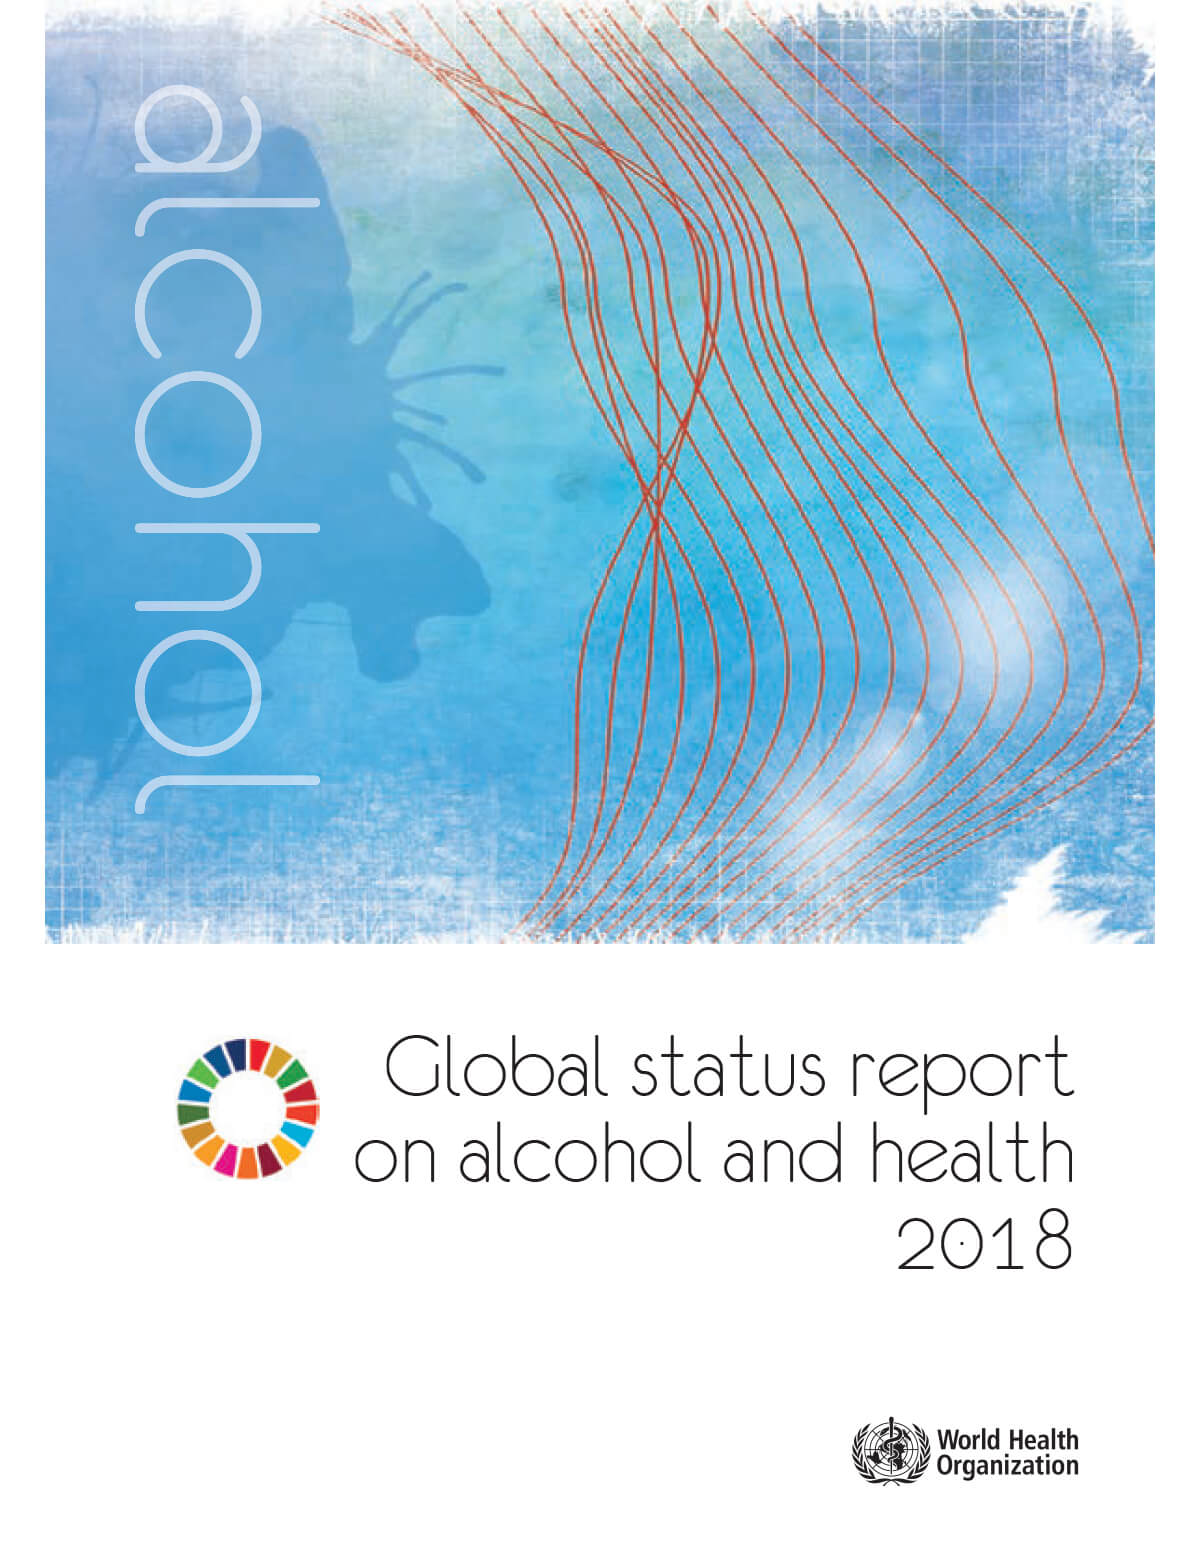 Global Status Report on Alcohol and Health 2018 - World Health Organization